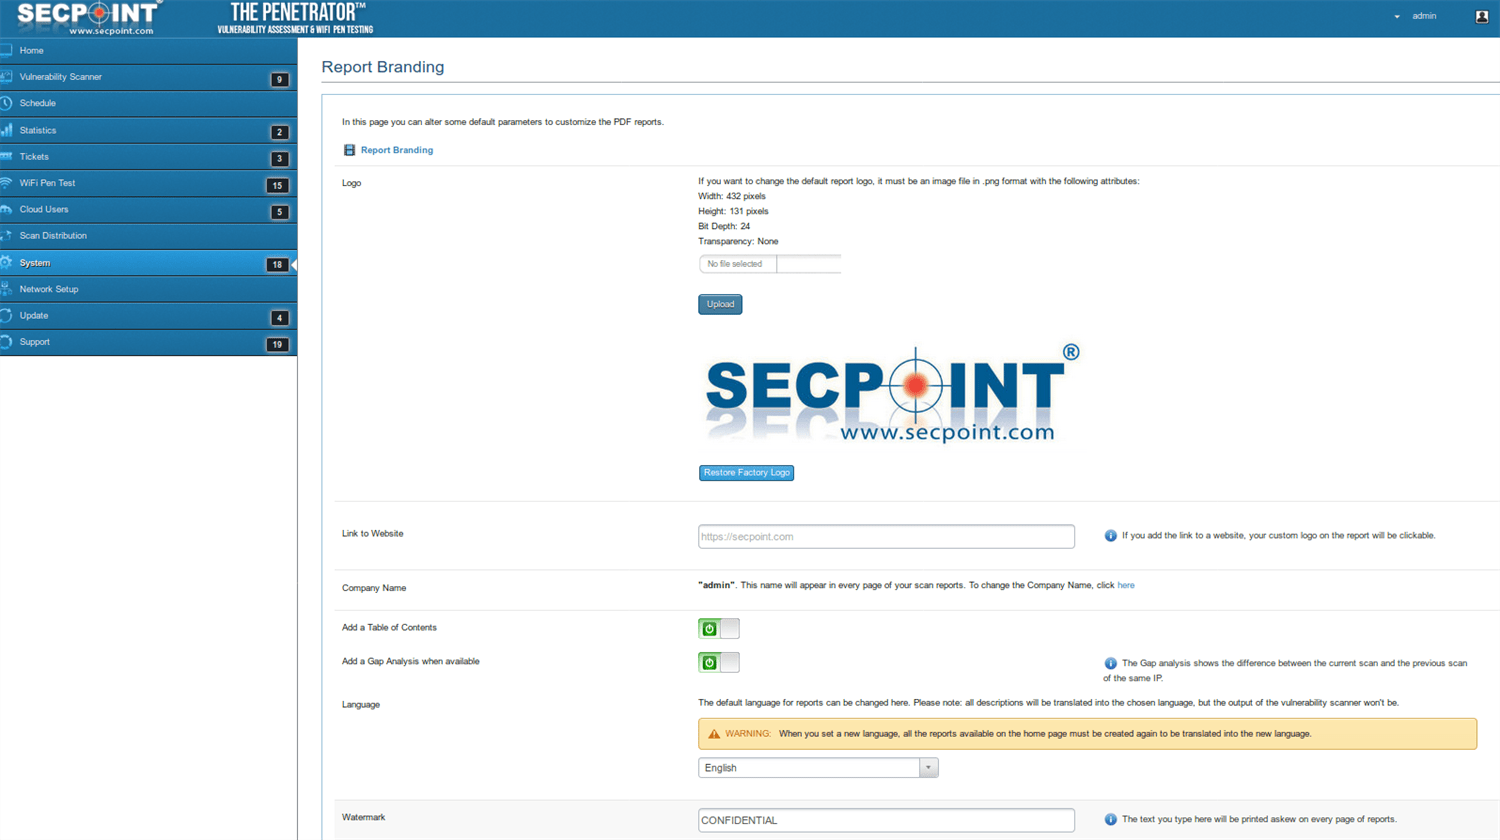 SecPoint Penetrator S9 - 8 IP Concurrent Scan License Vuln Scanning Appliance (3 Years License) - SecPoint